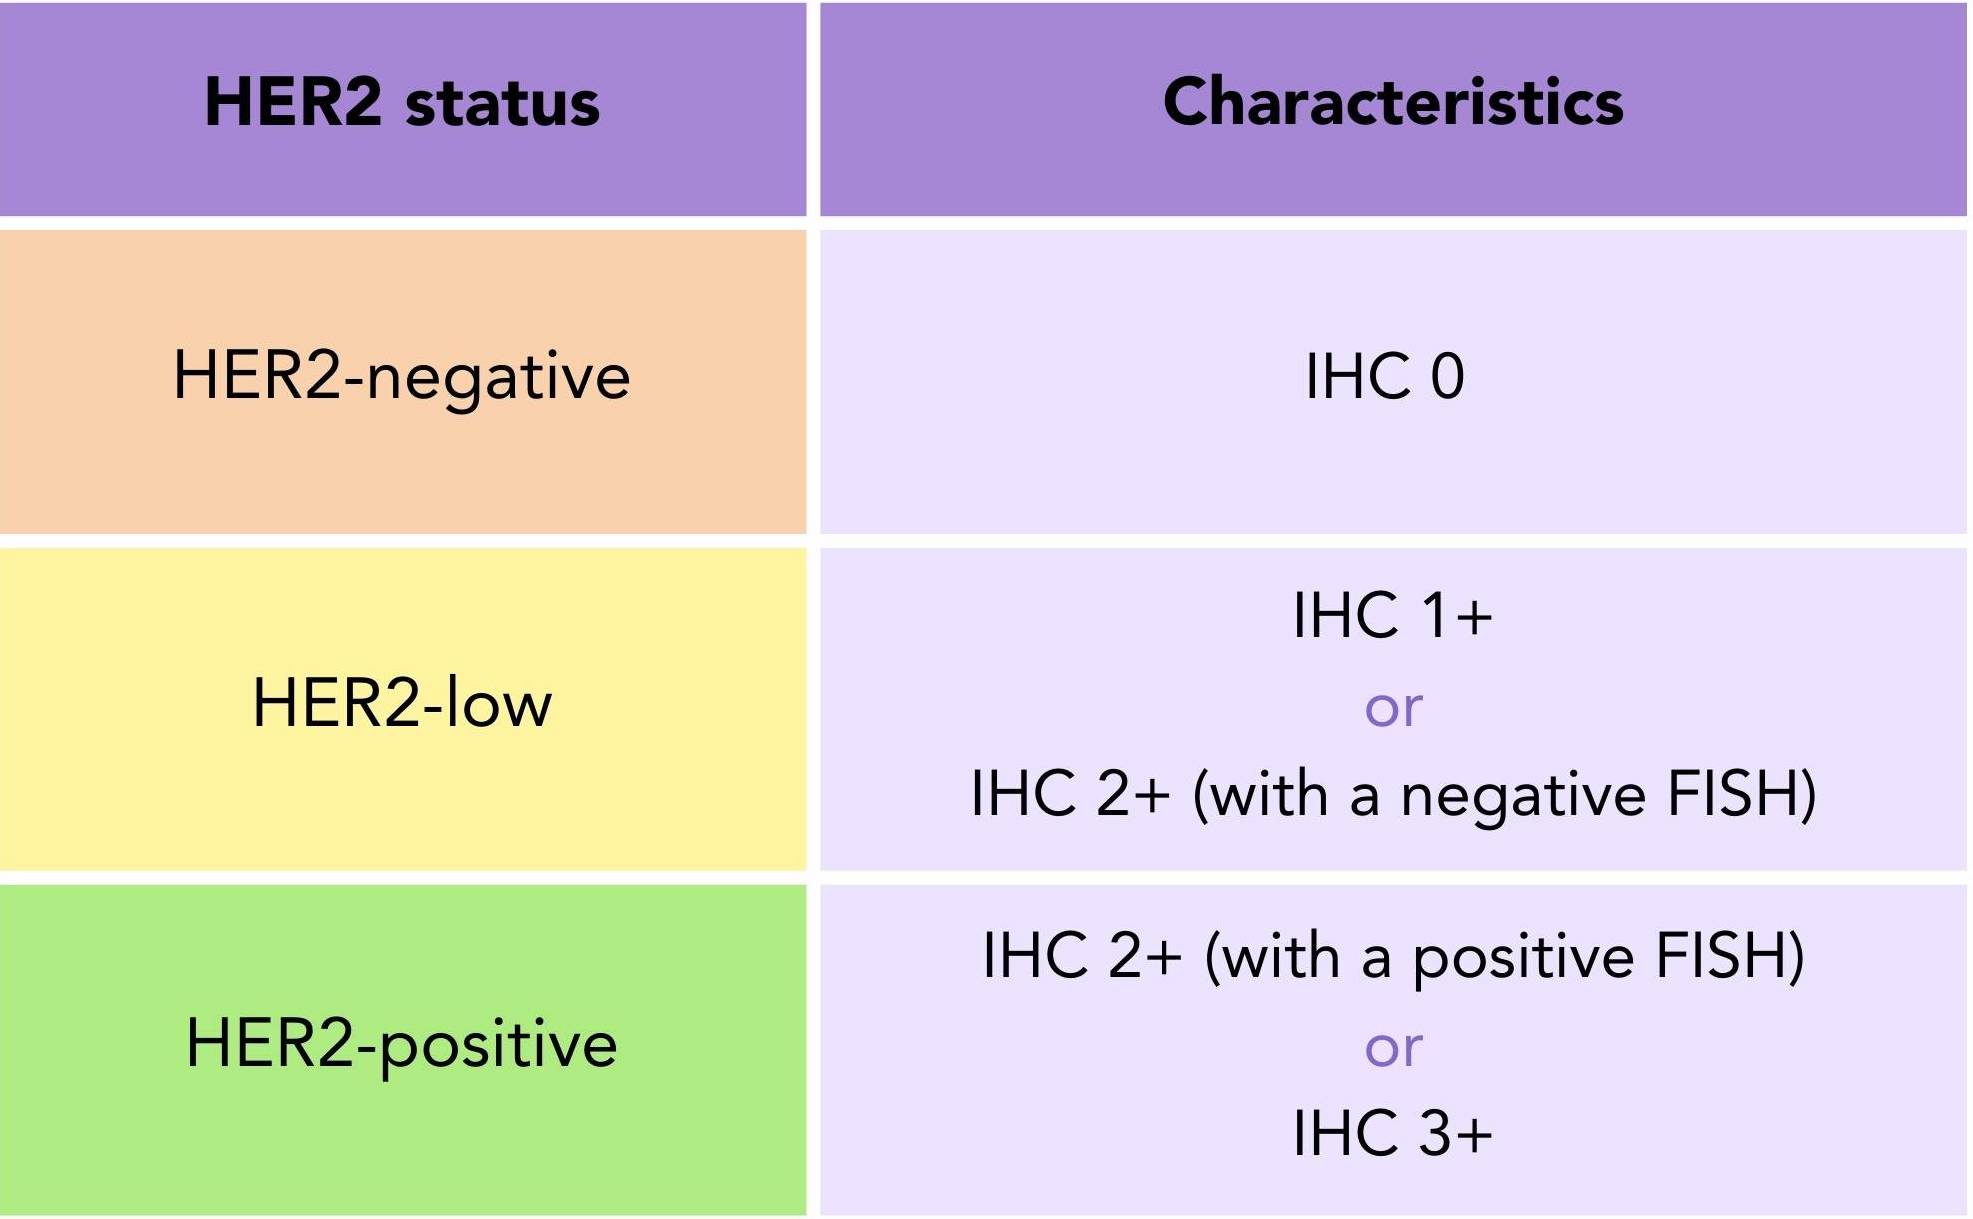 A table describing the characteristics of HER2-negative (HER2-), HER2-low, and HER2-positive (HER2+) breast cancer.